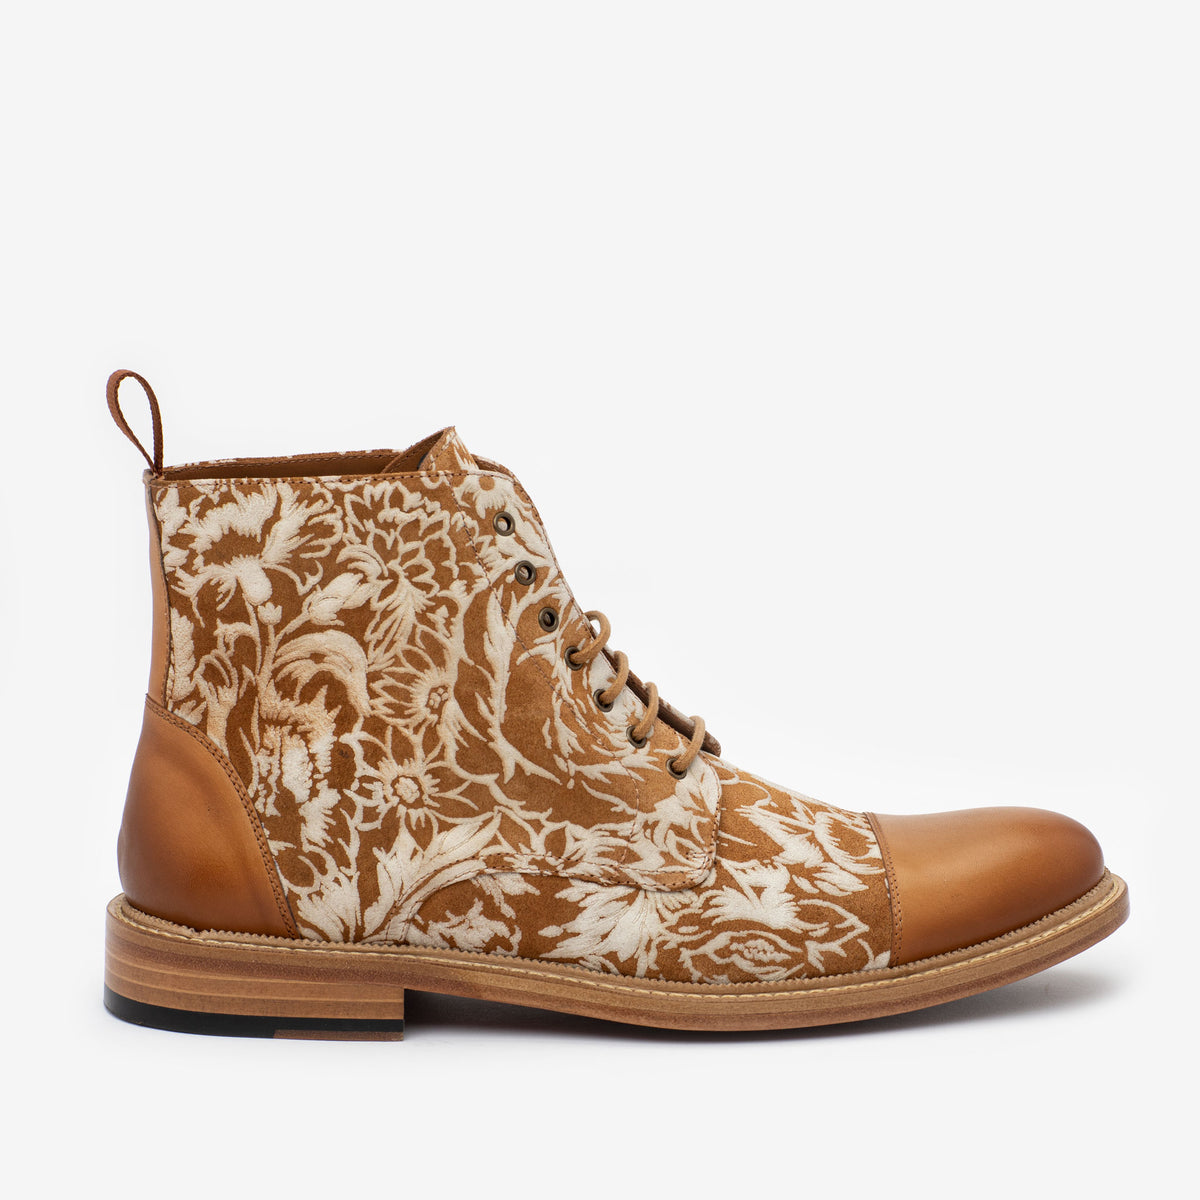 The Rome Boot in Floral